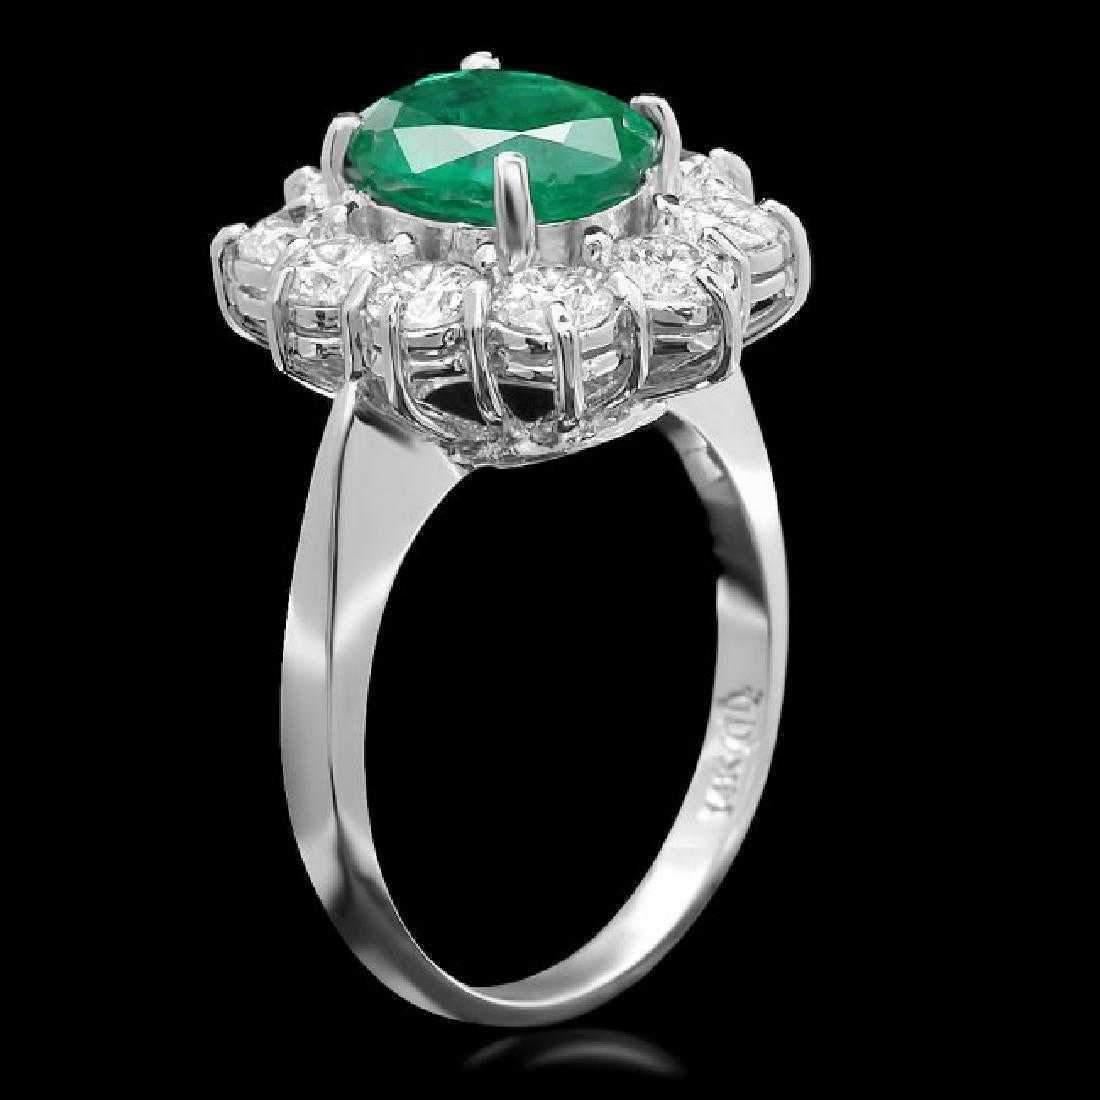 3.65 Carats Natural Emerald and Diamond 14K Solid White Gold Ring

Total Natural Green Emerald Weight is: Approx. 2.30 Carats (transparent)

Emerald Measures: 10 x 8mm

Natural Round Diamonds Weight: Approx. 1.35 Carats (color G-H / Clarity